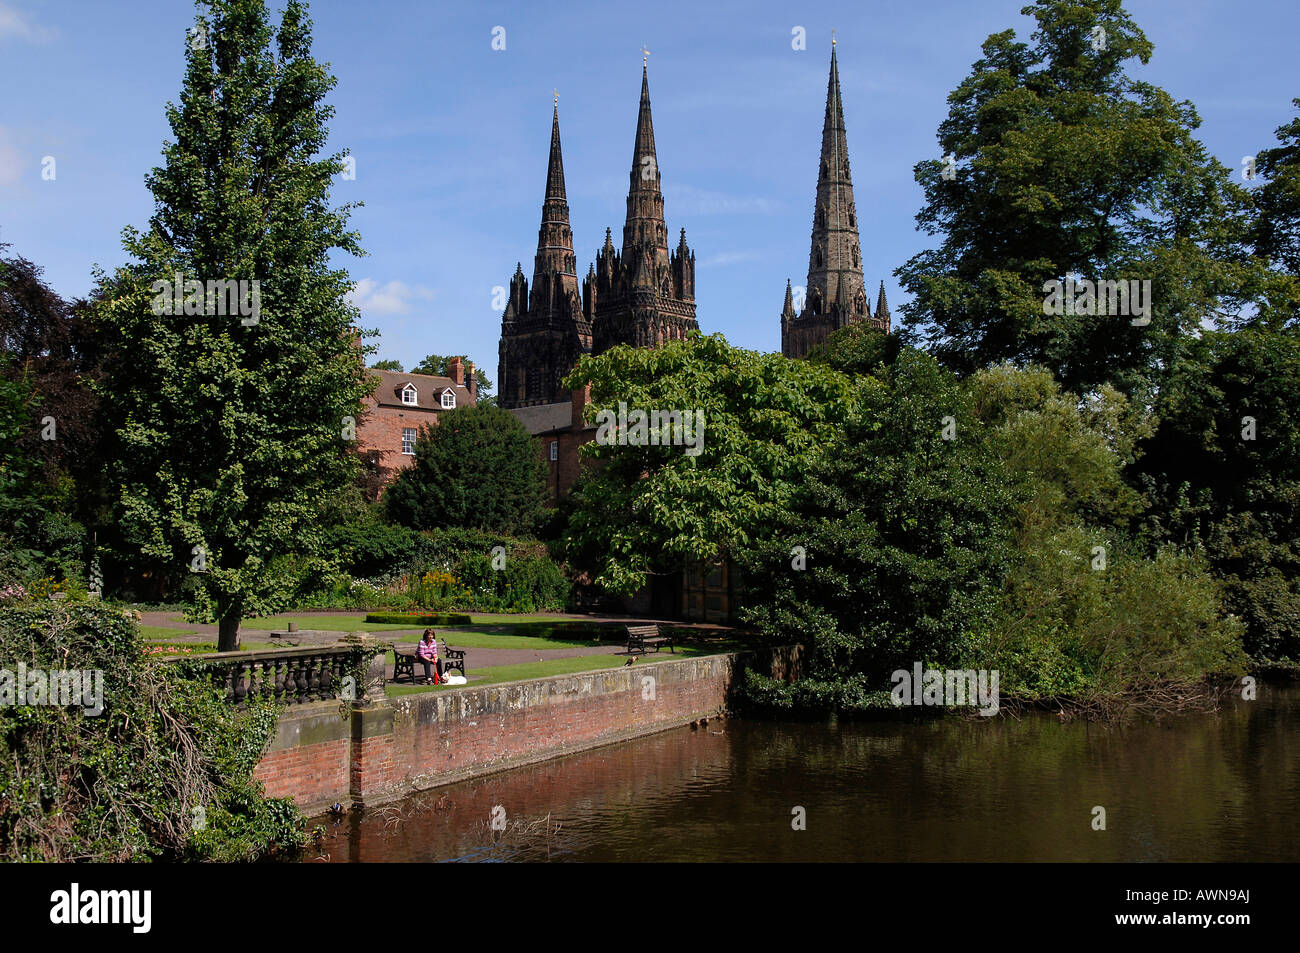 Pond and park surrounding Lichfield Cathedral (built 1195), the only medieval cathedral in England to have three spires, Lichfi Stock Photo